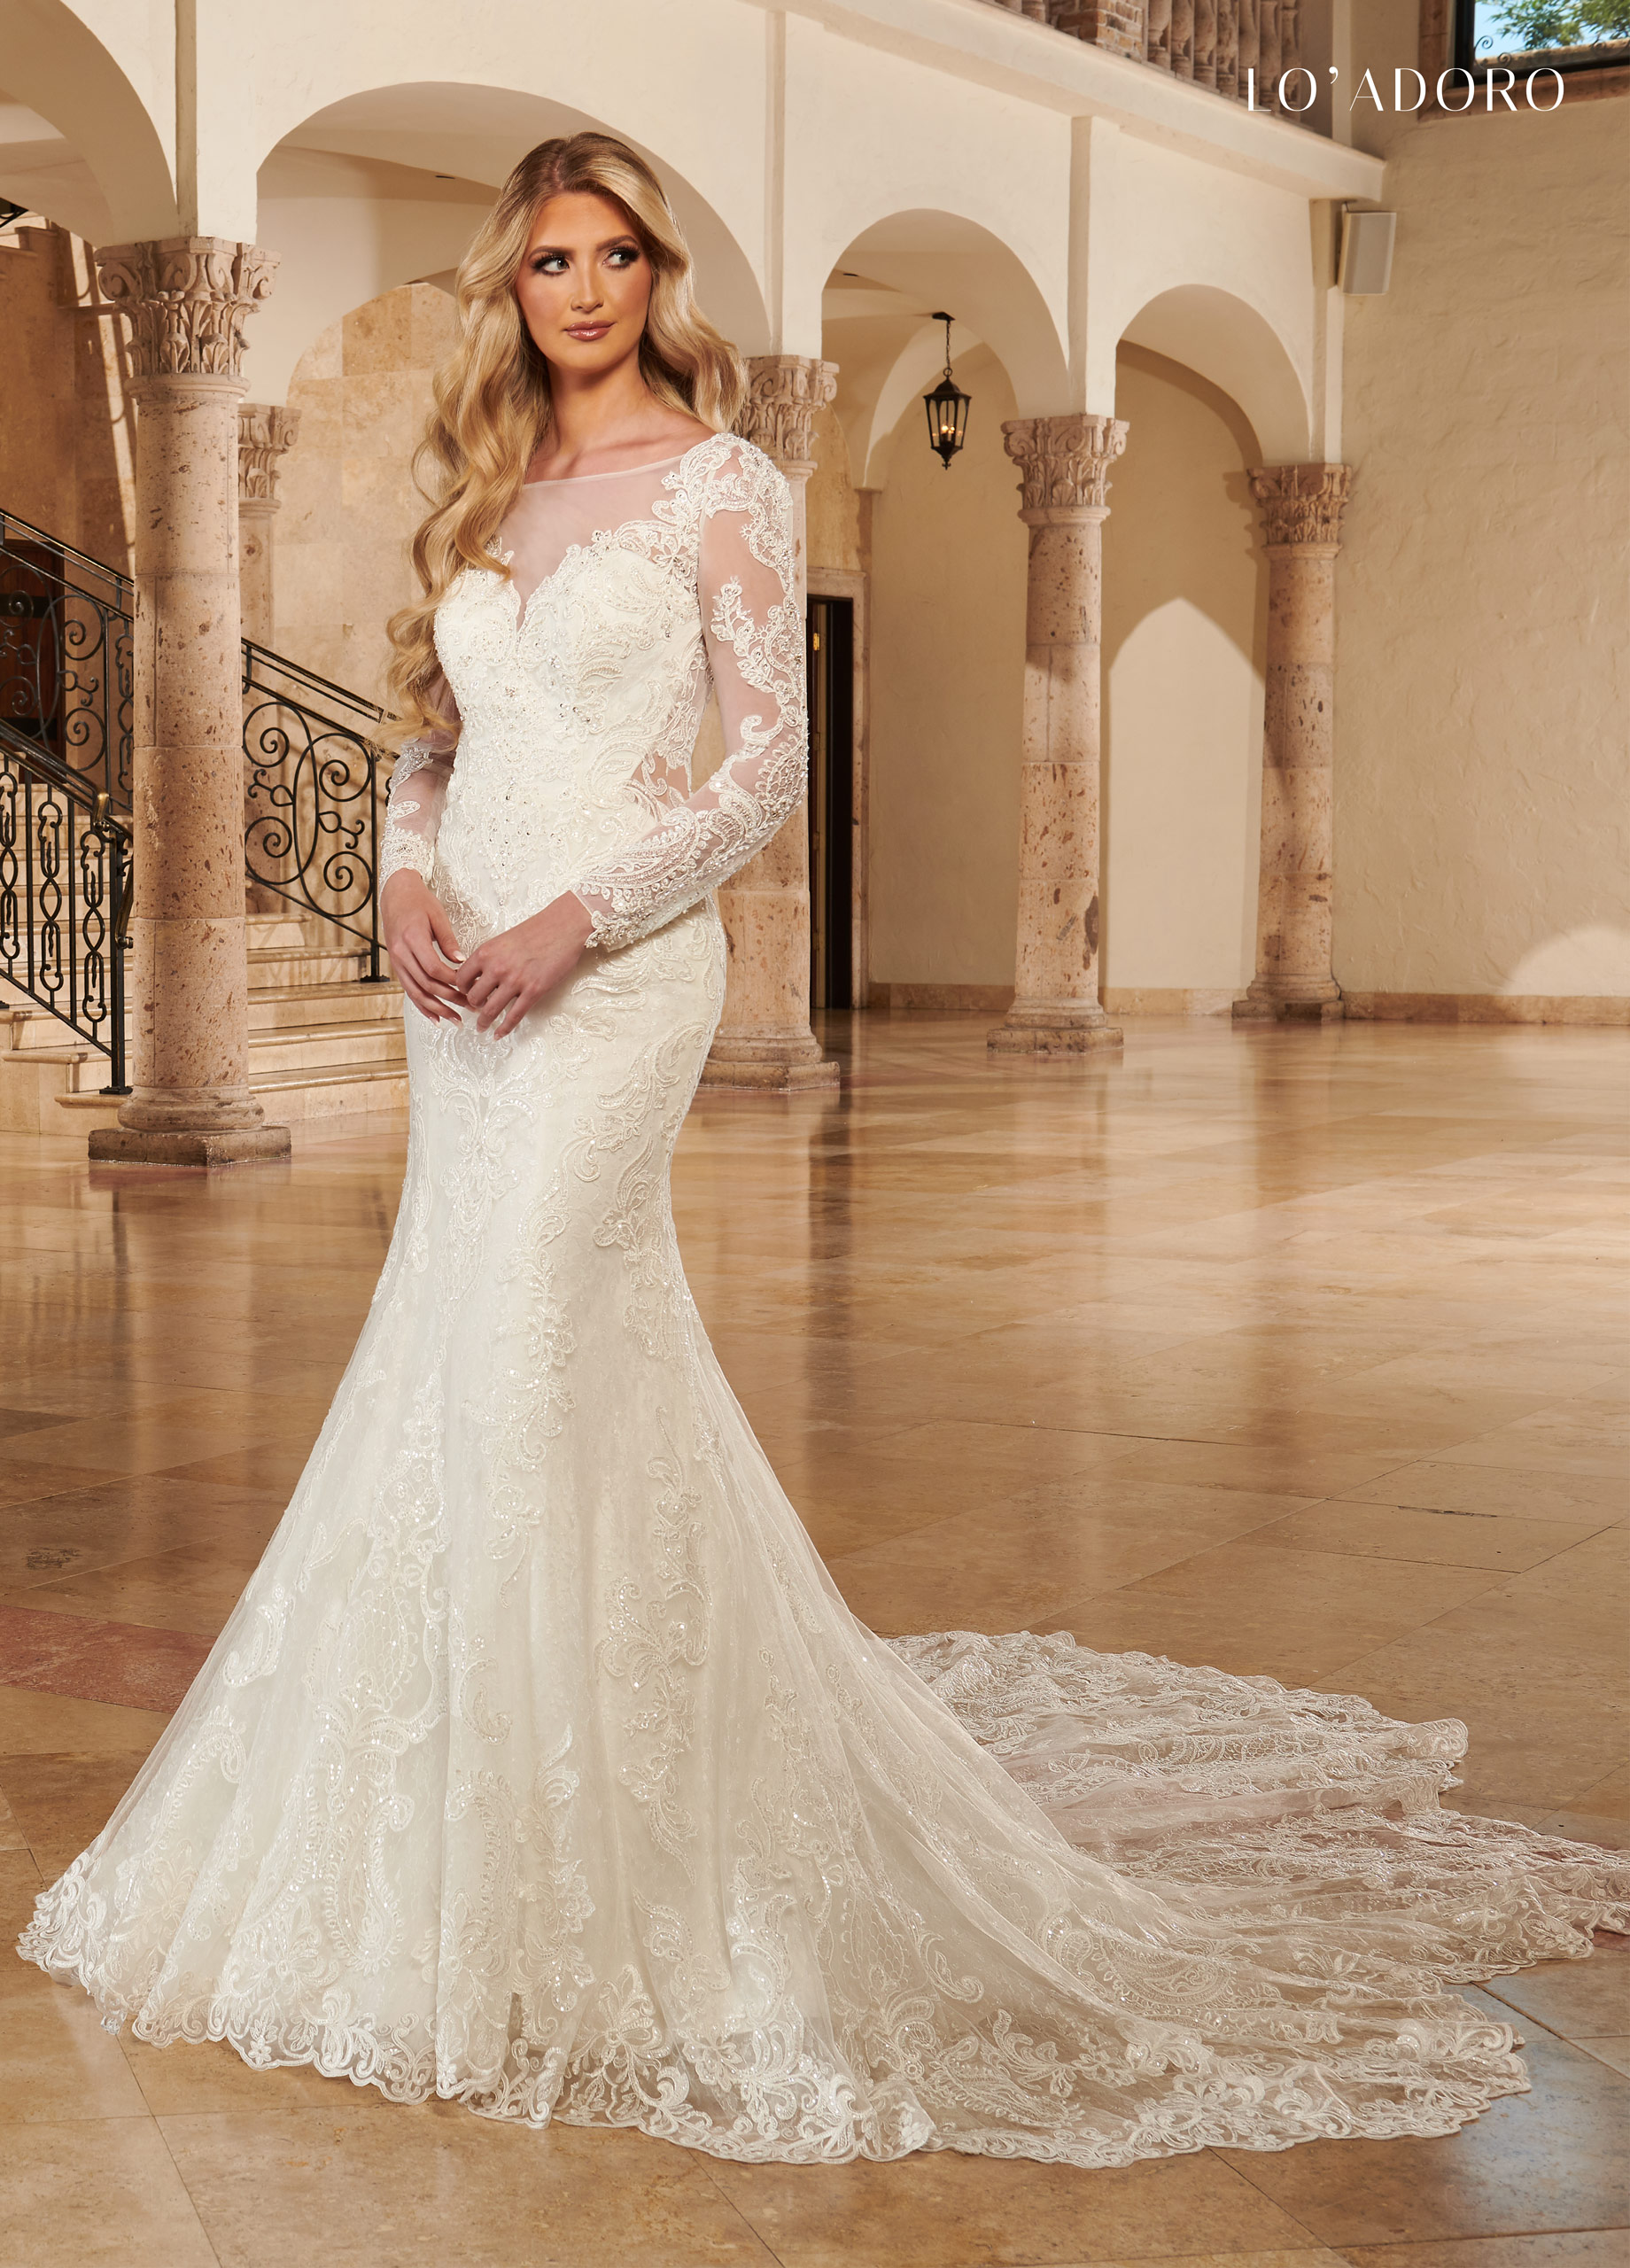 High Neckline Fit & Flare Lo' Adoro Bridal in Ivory,White Color